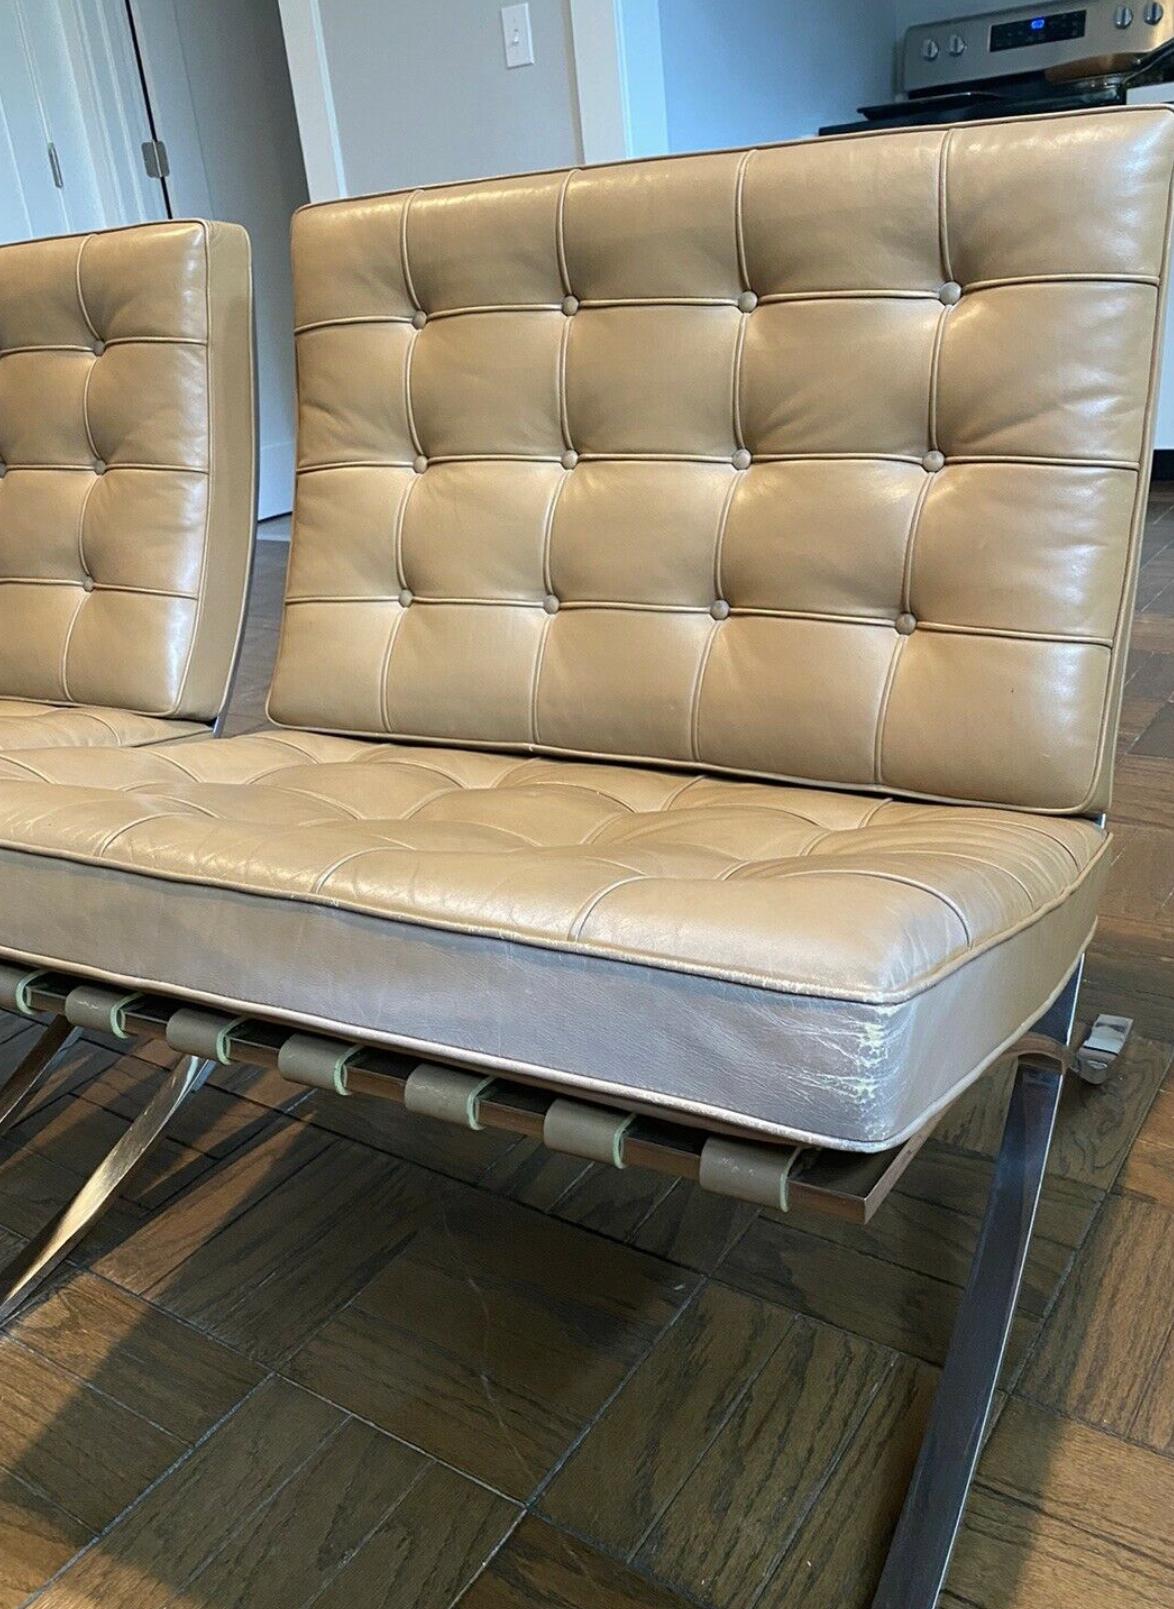 Knoll Barcelona lounge chair, stainless steel, Mies van der Rohe, circa early 1980s. Light chestnut / camel brown original leather, very rare, straps in-tact, Labelled. Listing and price listed is per single chair. MSRP for current production in